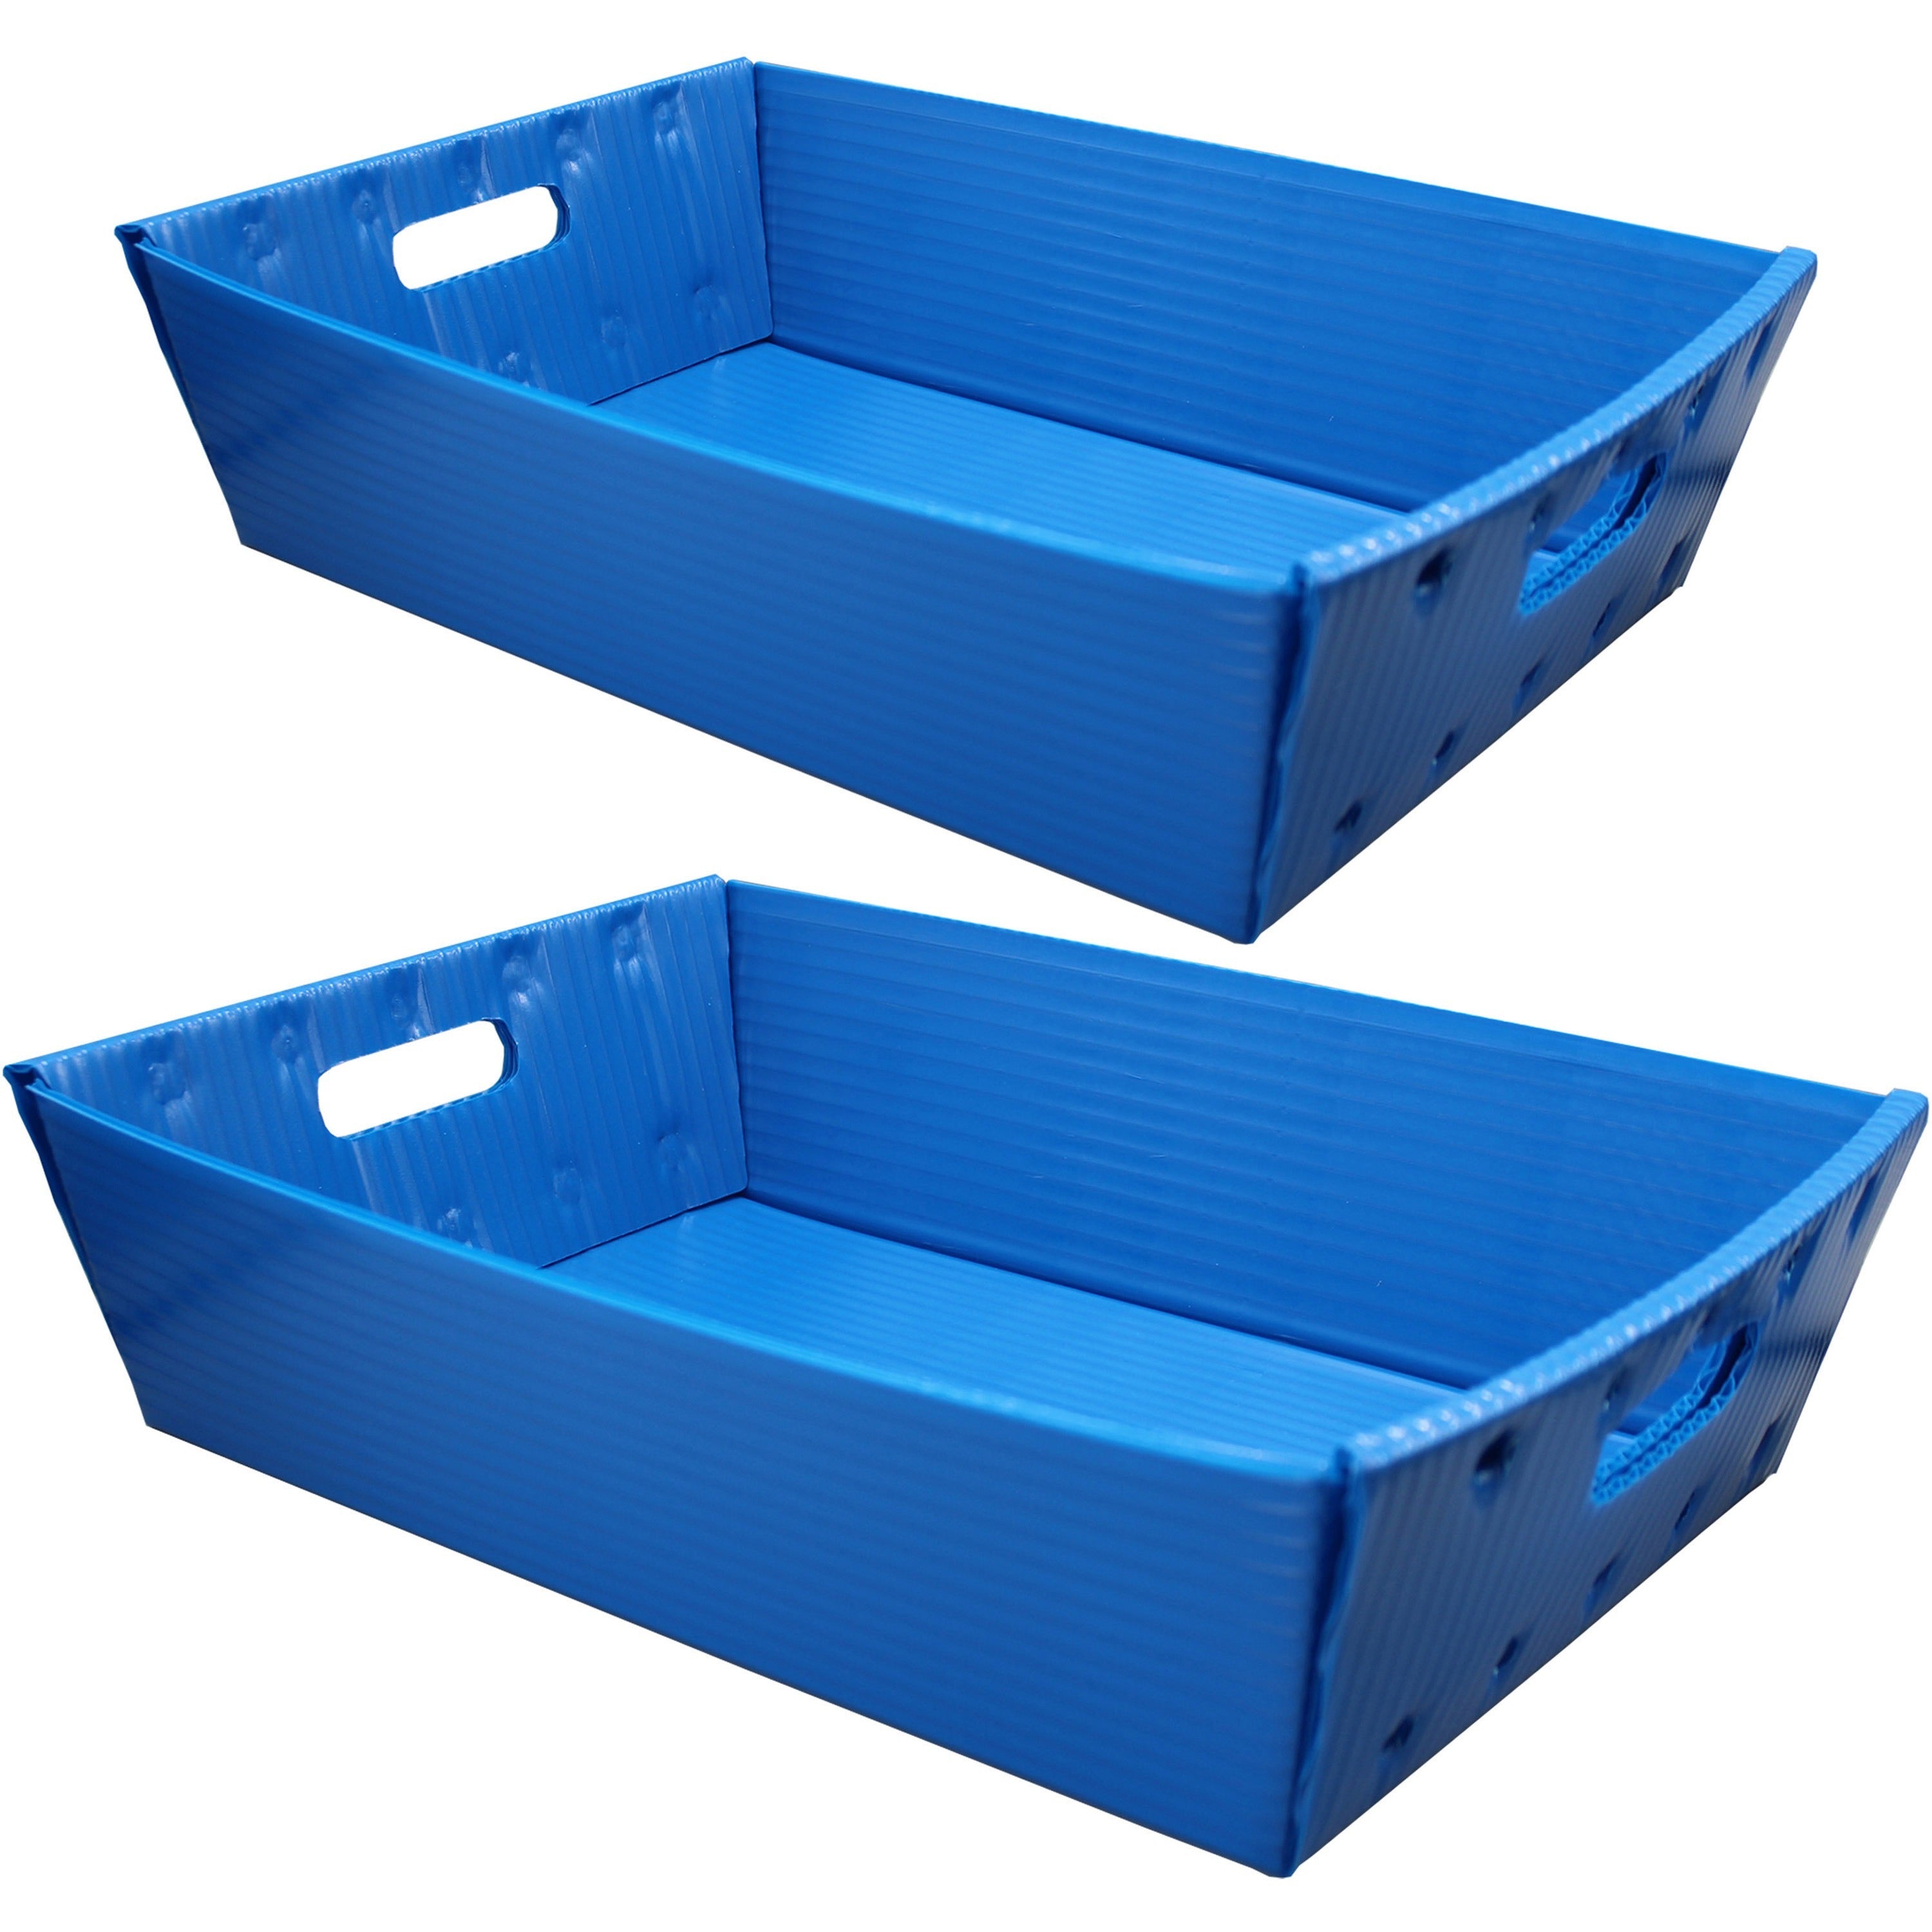 flipside-plastic-welded-letter-trays-45-height-x-18-width-x-12-depth-welded-handle-compact-stackable-storage-space-durable-blue-plastic-2-pack_flp40361 - 1